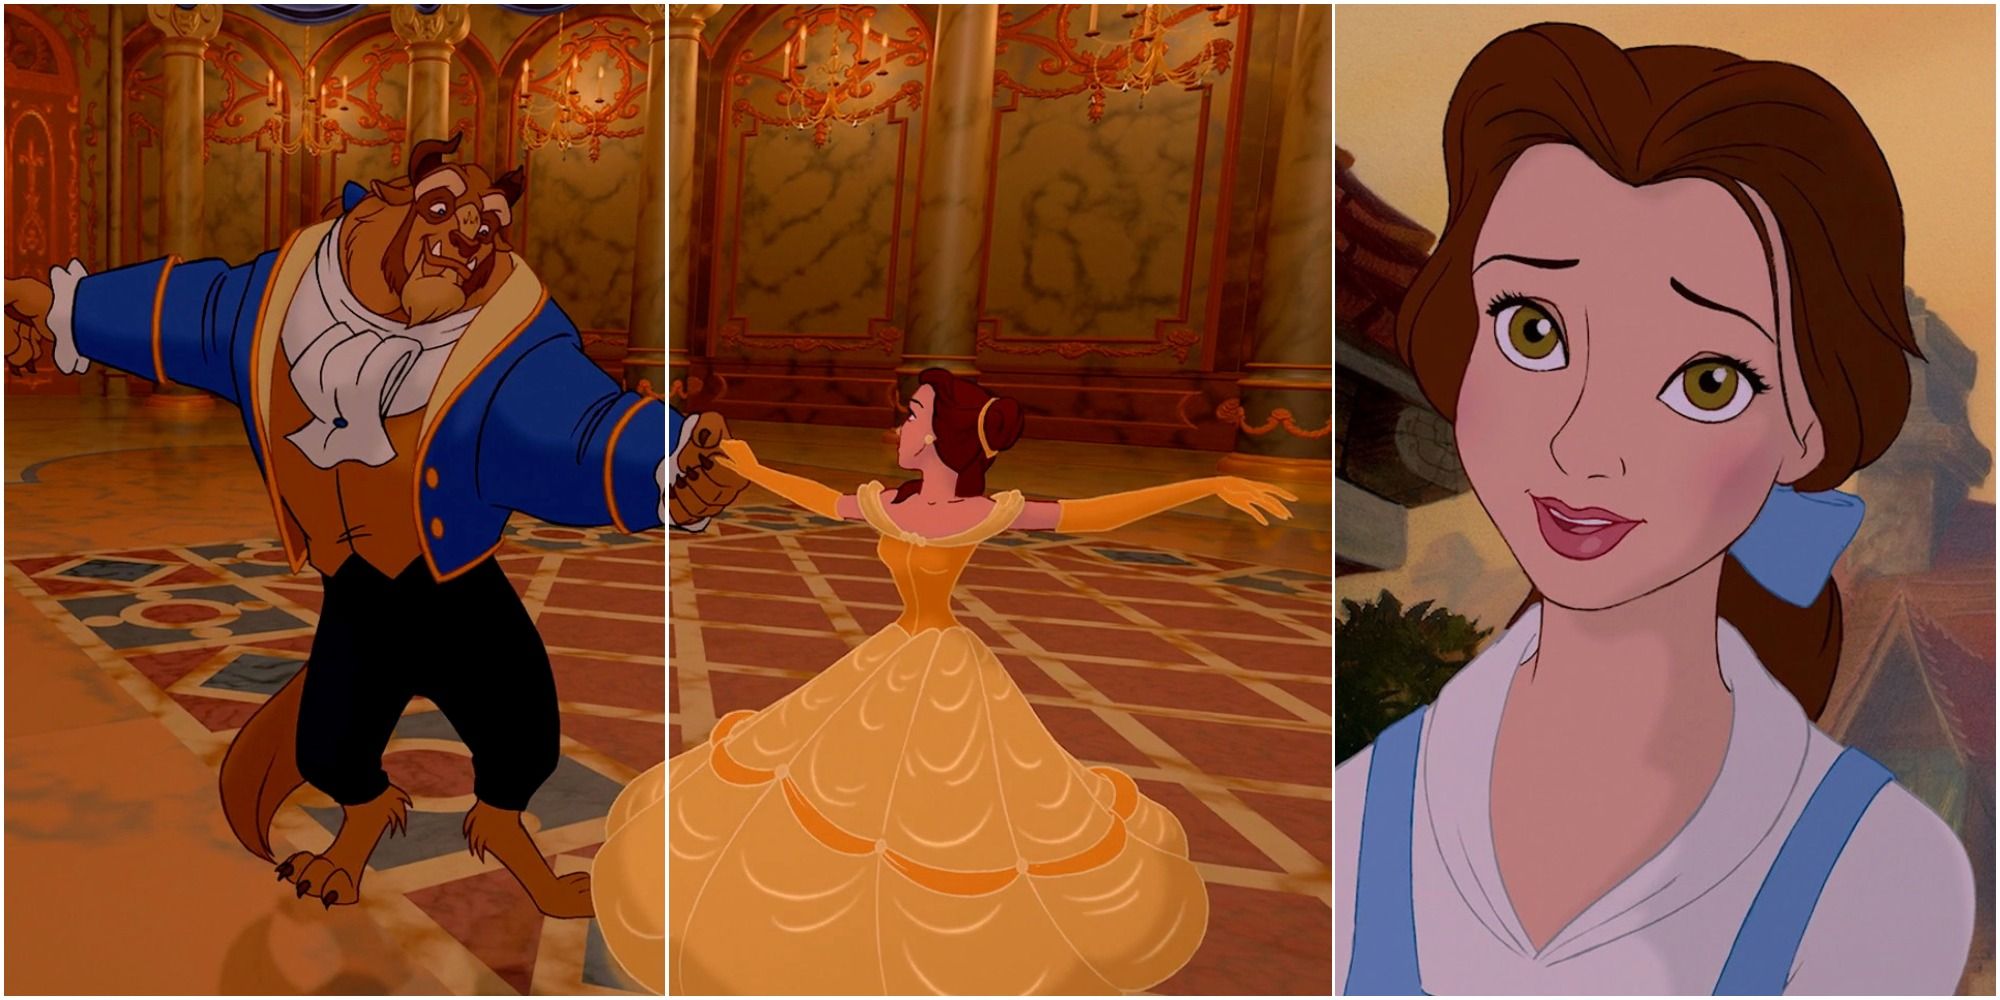 10 Things You Didn't Know About Disney's Beauty And The Beast